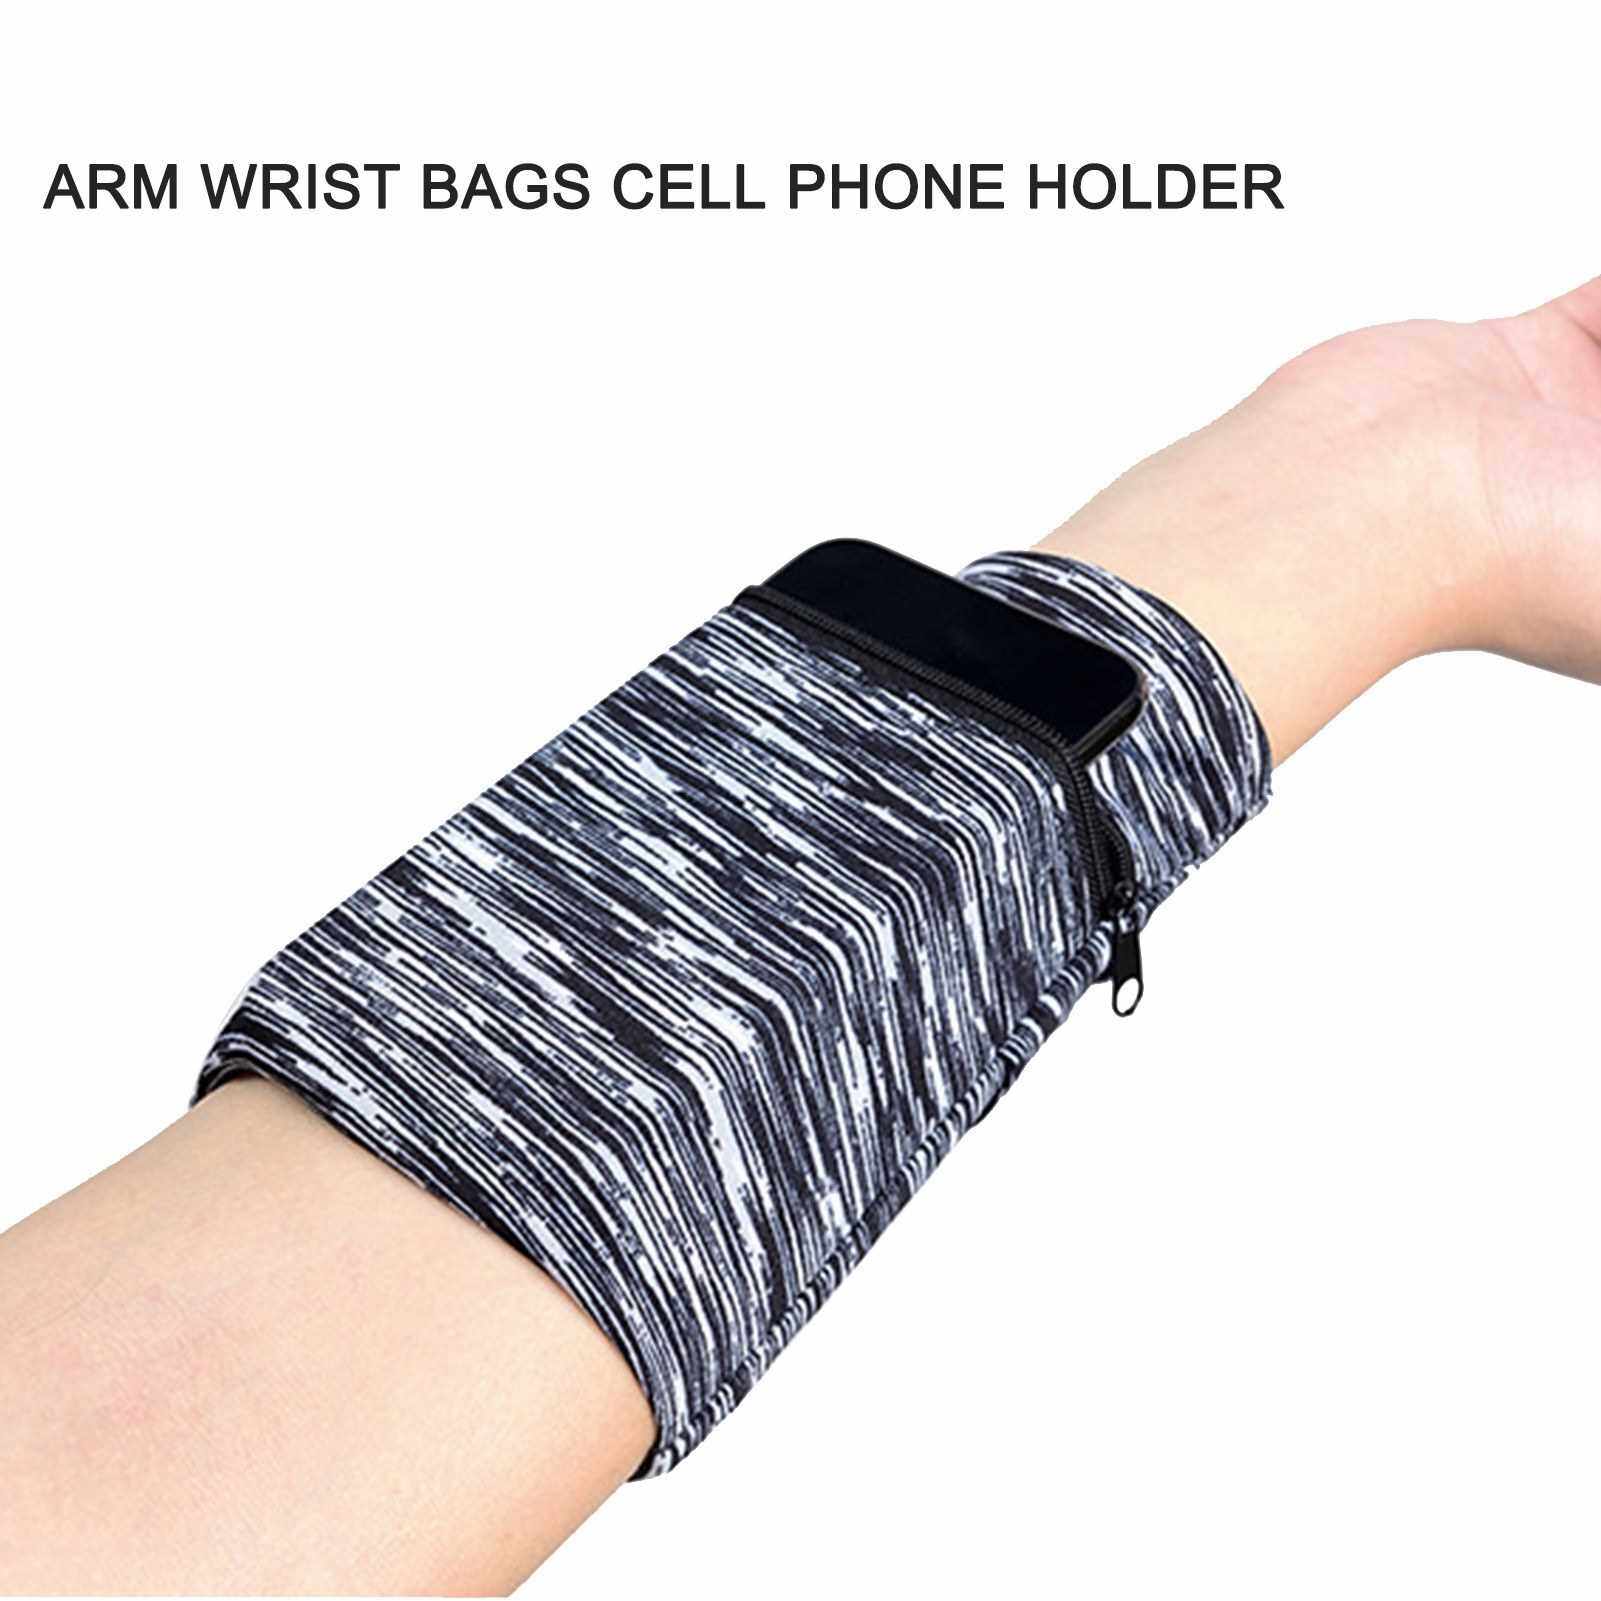 BEST SELLER Wrist Wallet Arm Wrist Bags Cell Phone Holder, Running Wrist Bag, Sweat Armband , Key Card Cash Pouch Cell Phone Pocket for Sports Fitness, Travel, Running, Fishing, Camping, Hiking (Brown)